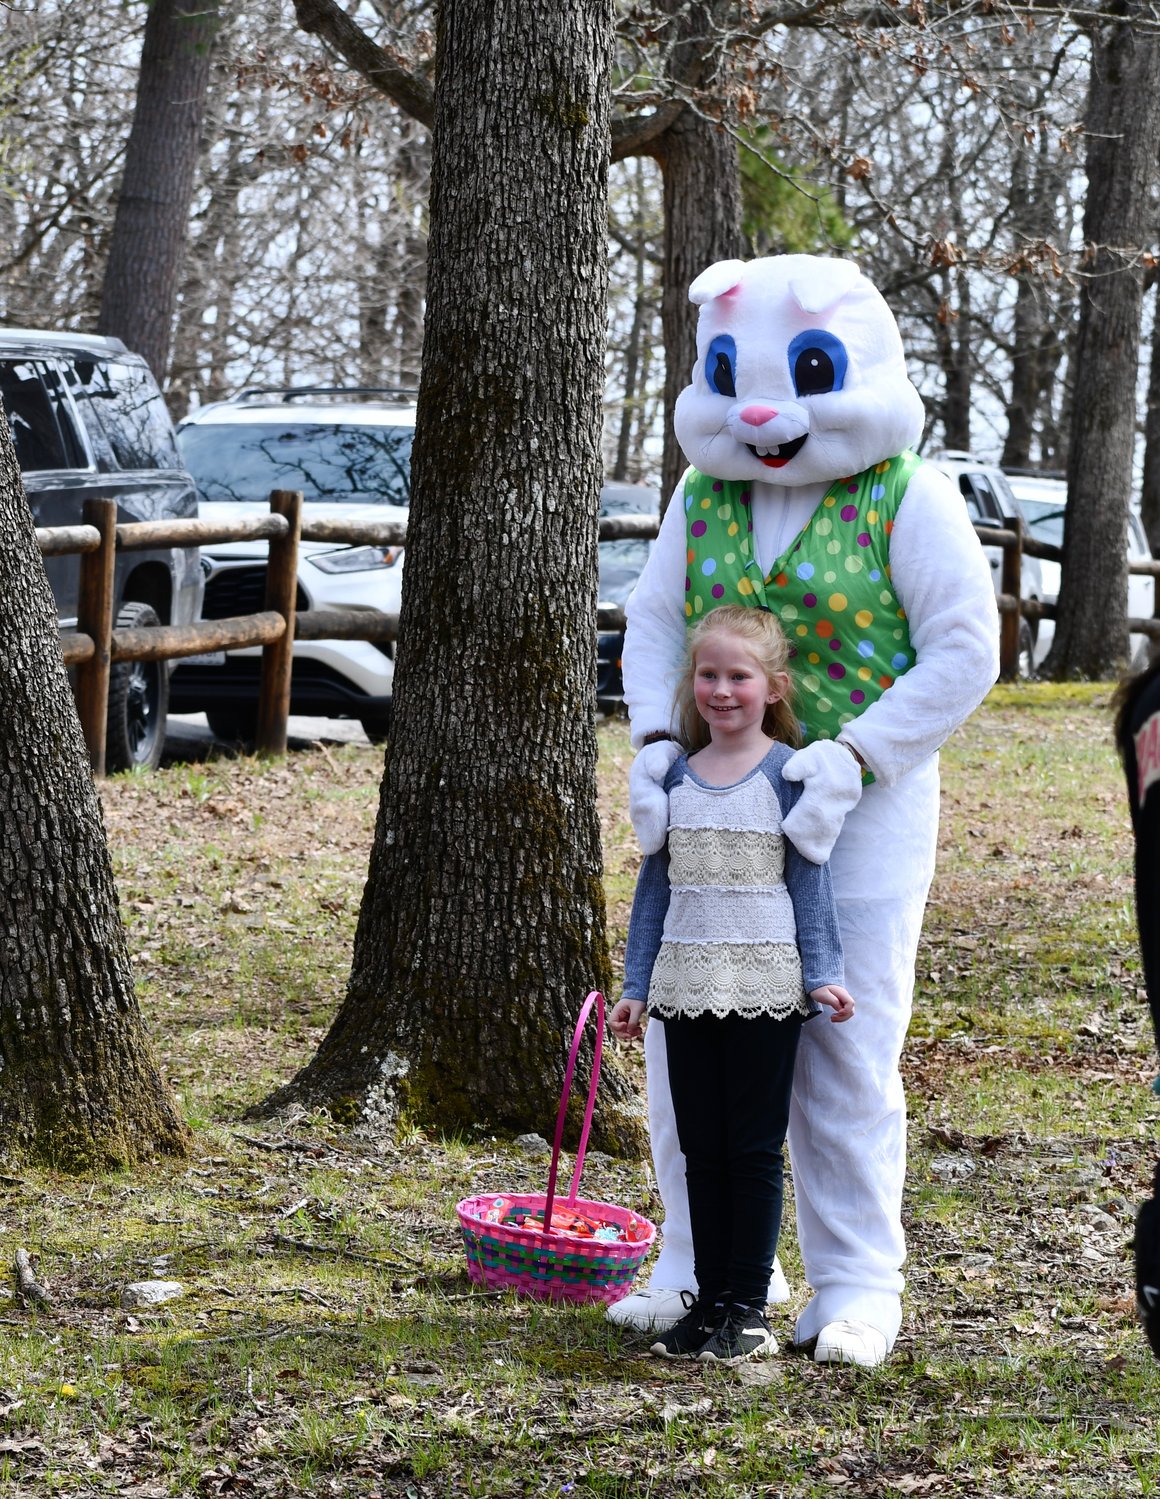 Cora Reynolds smiles as she poses with the Easter Bunny at the park on Saturday, April 16.